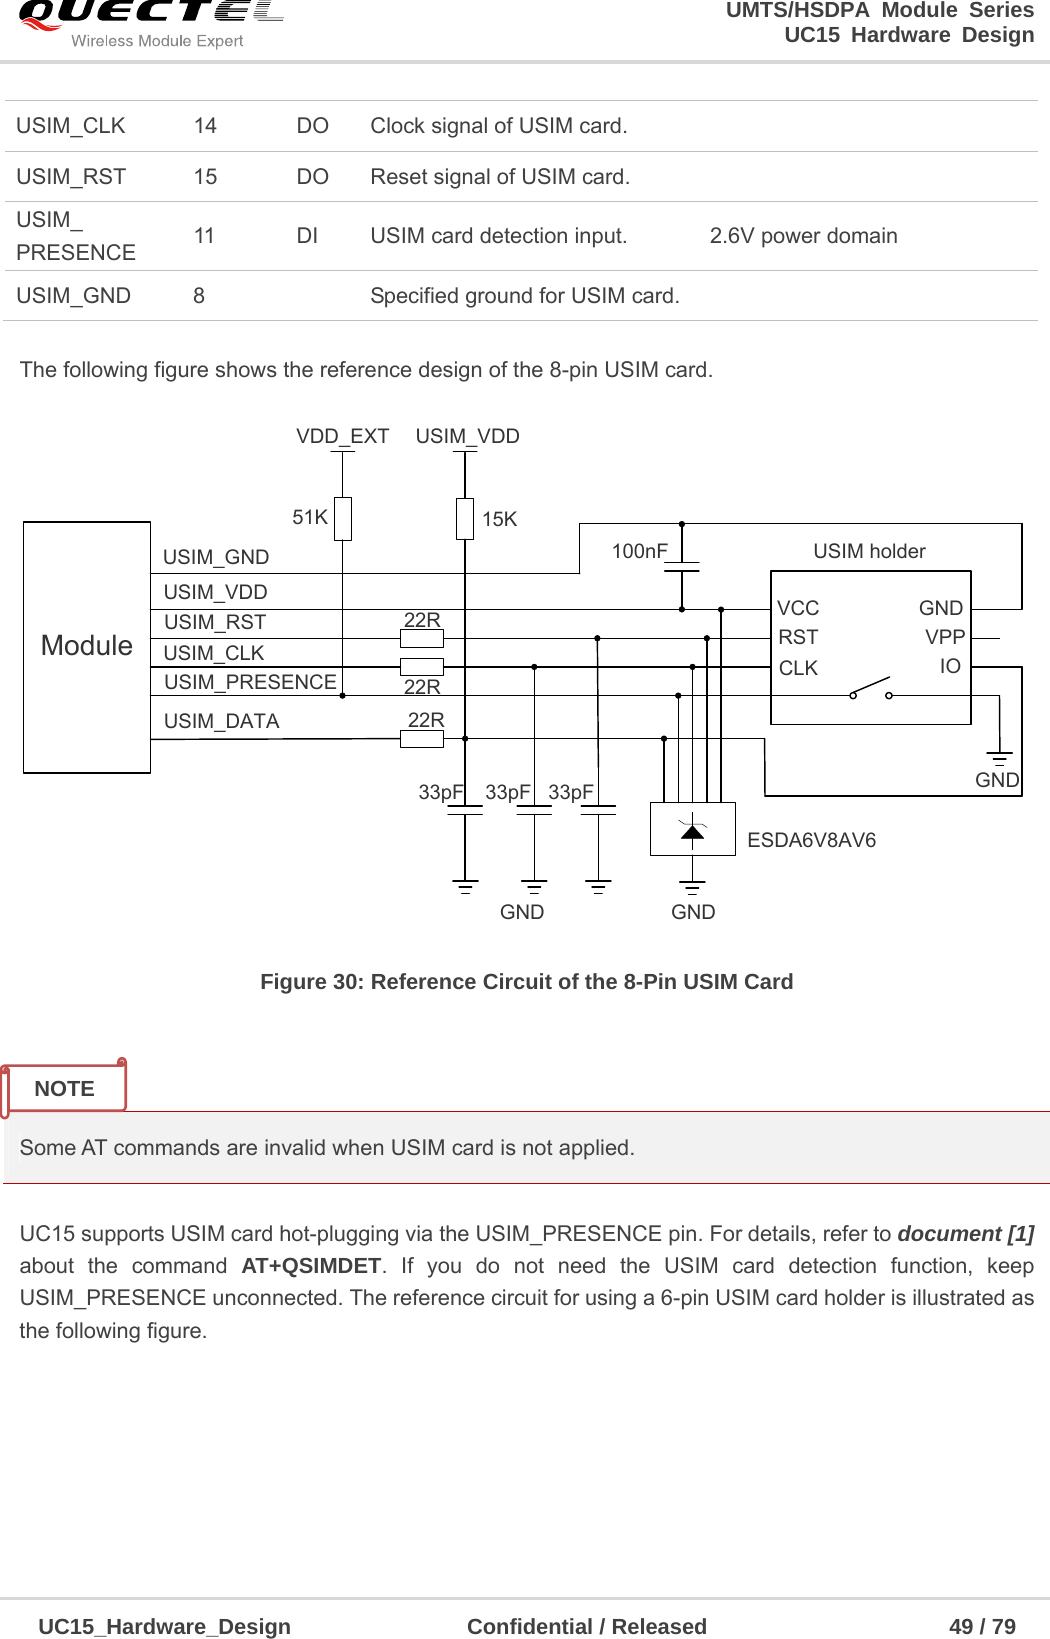                                                                        UMTS/HSDPA Module Series                                                                 UC15 Hardware Design  UC15_Hardware_Design                Confidential / Released                      49 / 79     The following figure shows the reference design of the 8-pin USIM card. ModuleUSIM_VDDUSIM_GNDUSIM_RSTUSIM_CLKUSIM_DATAUSIM_PRESENCE22R22R22RVDD_EXT51K100nF USIM holderGNDGNDESDA6V8AV633pF 33pF 33pFVCCRSTCLK IOVPPGNDGNDUSIM_VDD15K Figure 30: Reference Circuit of the 8-Pin USIM Card   Some AT commands are invalid when USIM card is not applied.  UC15 supports USIM card hot-plugging via the USIM_PRESENCE pin. For details, refer to document [1] about the command AT+QSIMDET. If you do not need the USIM card detection function, keep USIM_PRESENCE unconnected. The reference circuit for using a 6-pin USIM card holder is illustrated as the following figure. USIM_CLK  14  DO  Clock signal of USIM card.   USIM_RST  15  DO  Reset signal of USIM card.   USIM_ PRESENCE  11  DI  USIM card detection input.  2.6V power domain USIM_GND  8    Specified ground for USIM card.   NOTE 